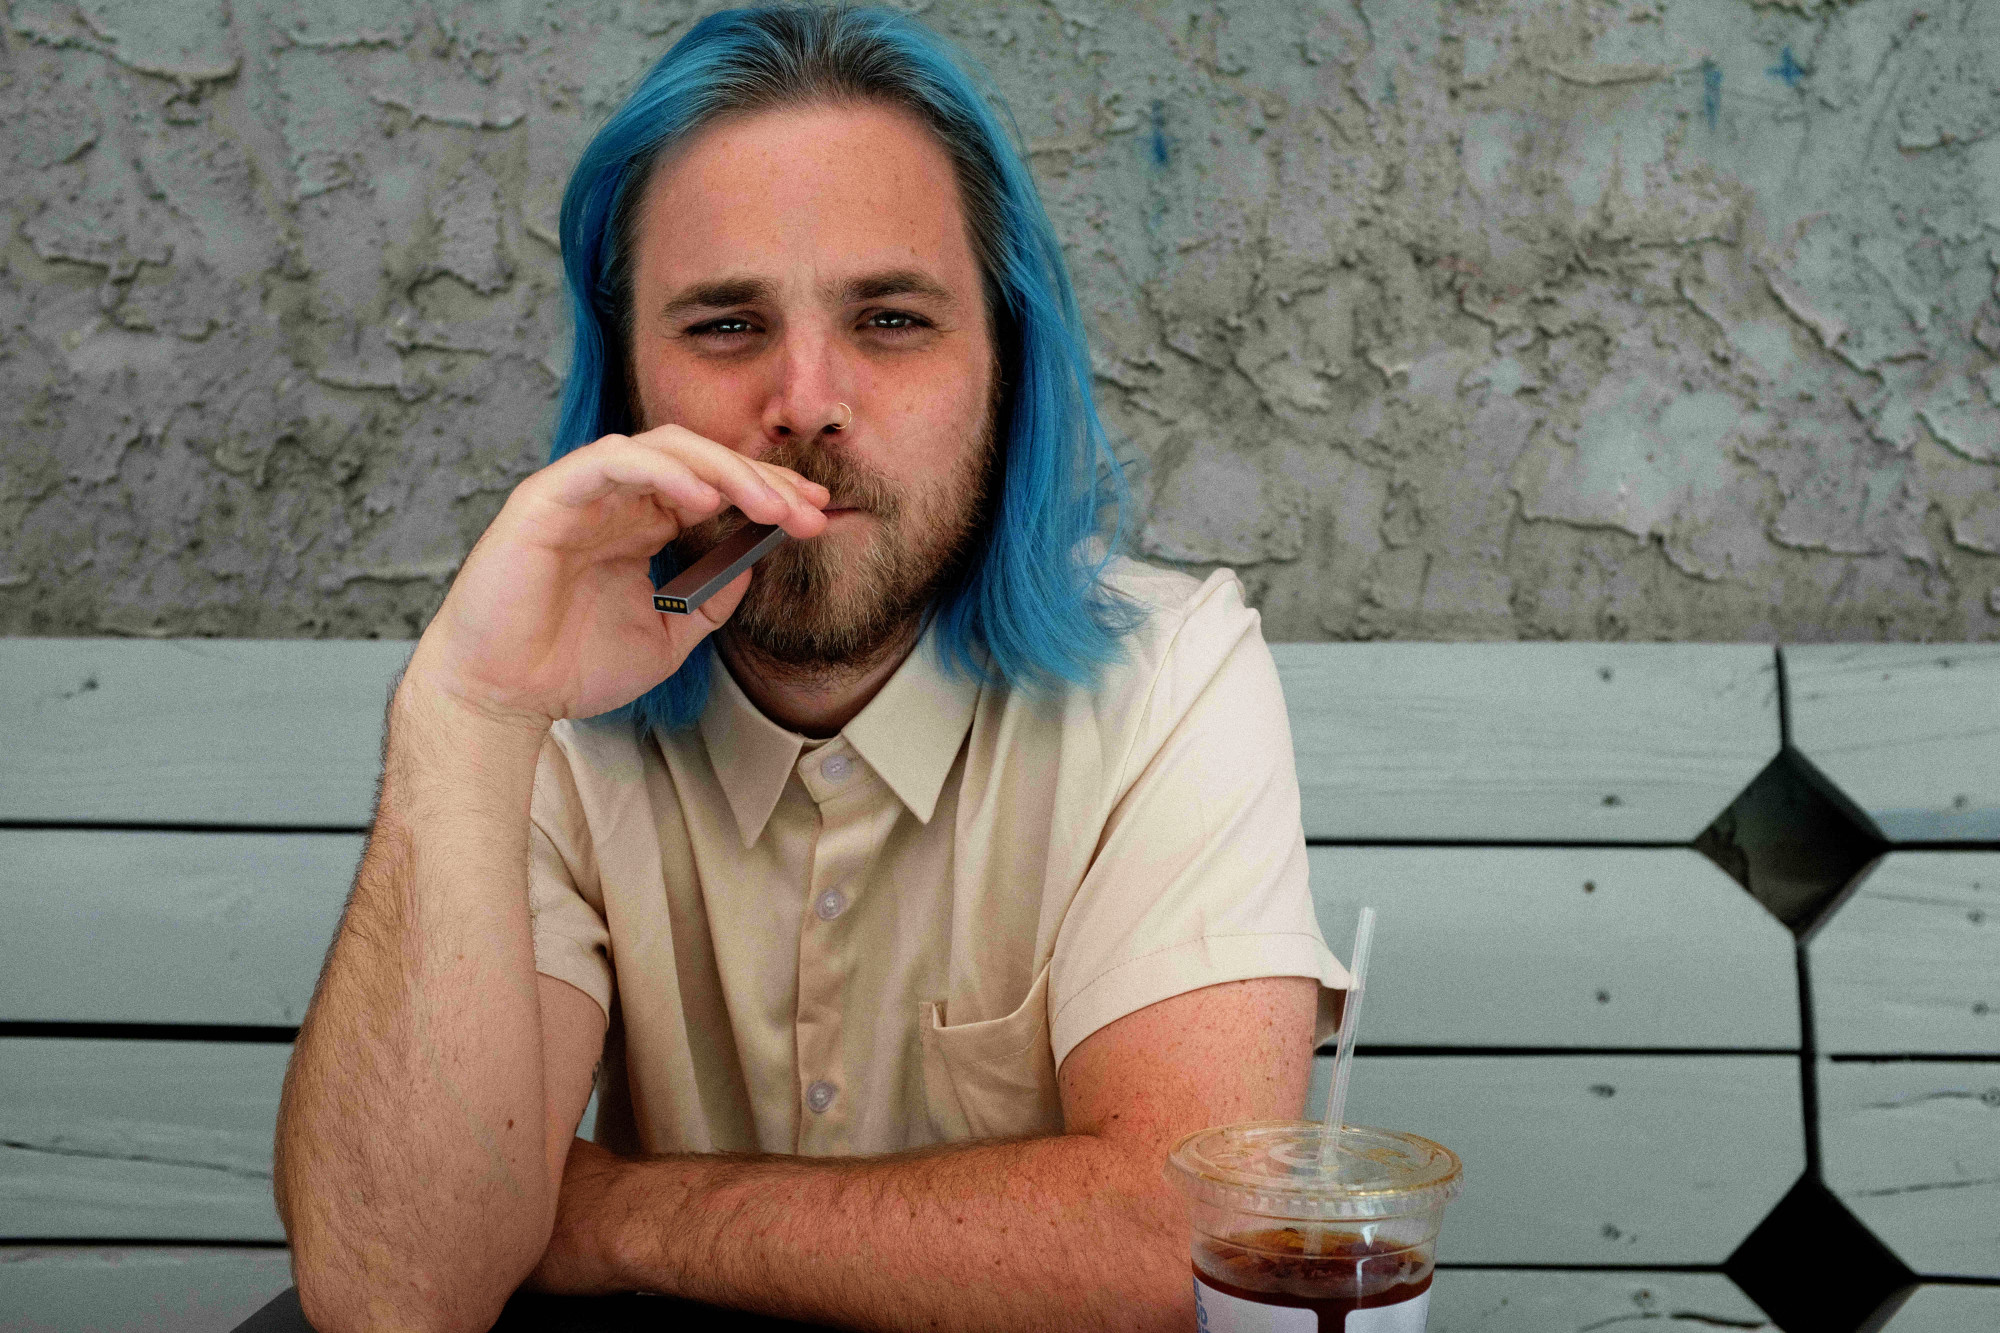 A blue-haired writer vaping a Juul at a cafe in Williamsburg, who would've thought?